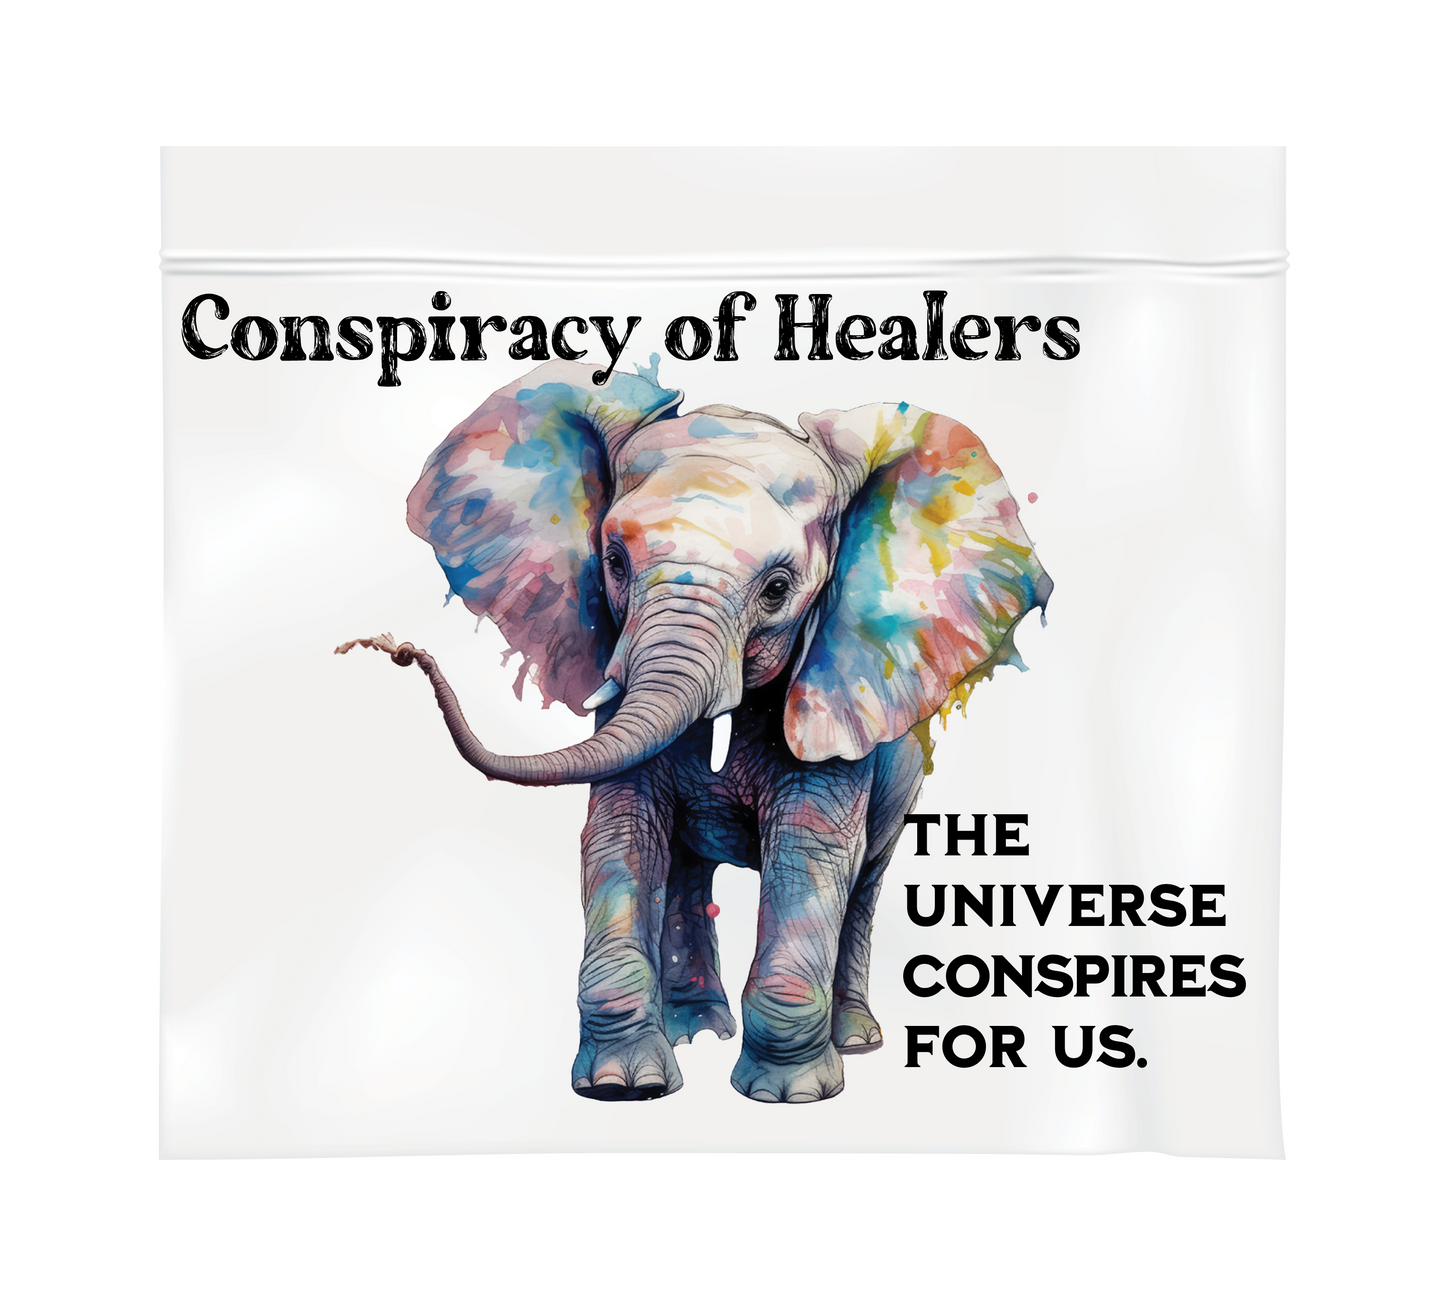 A Conspiracy of Healers